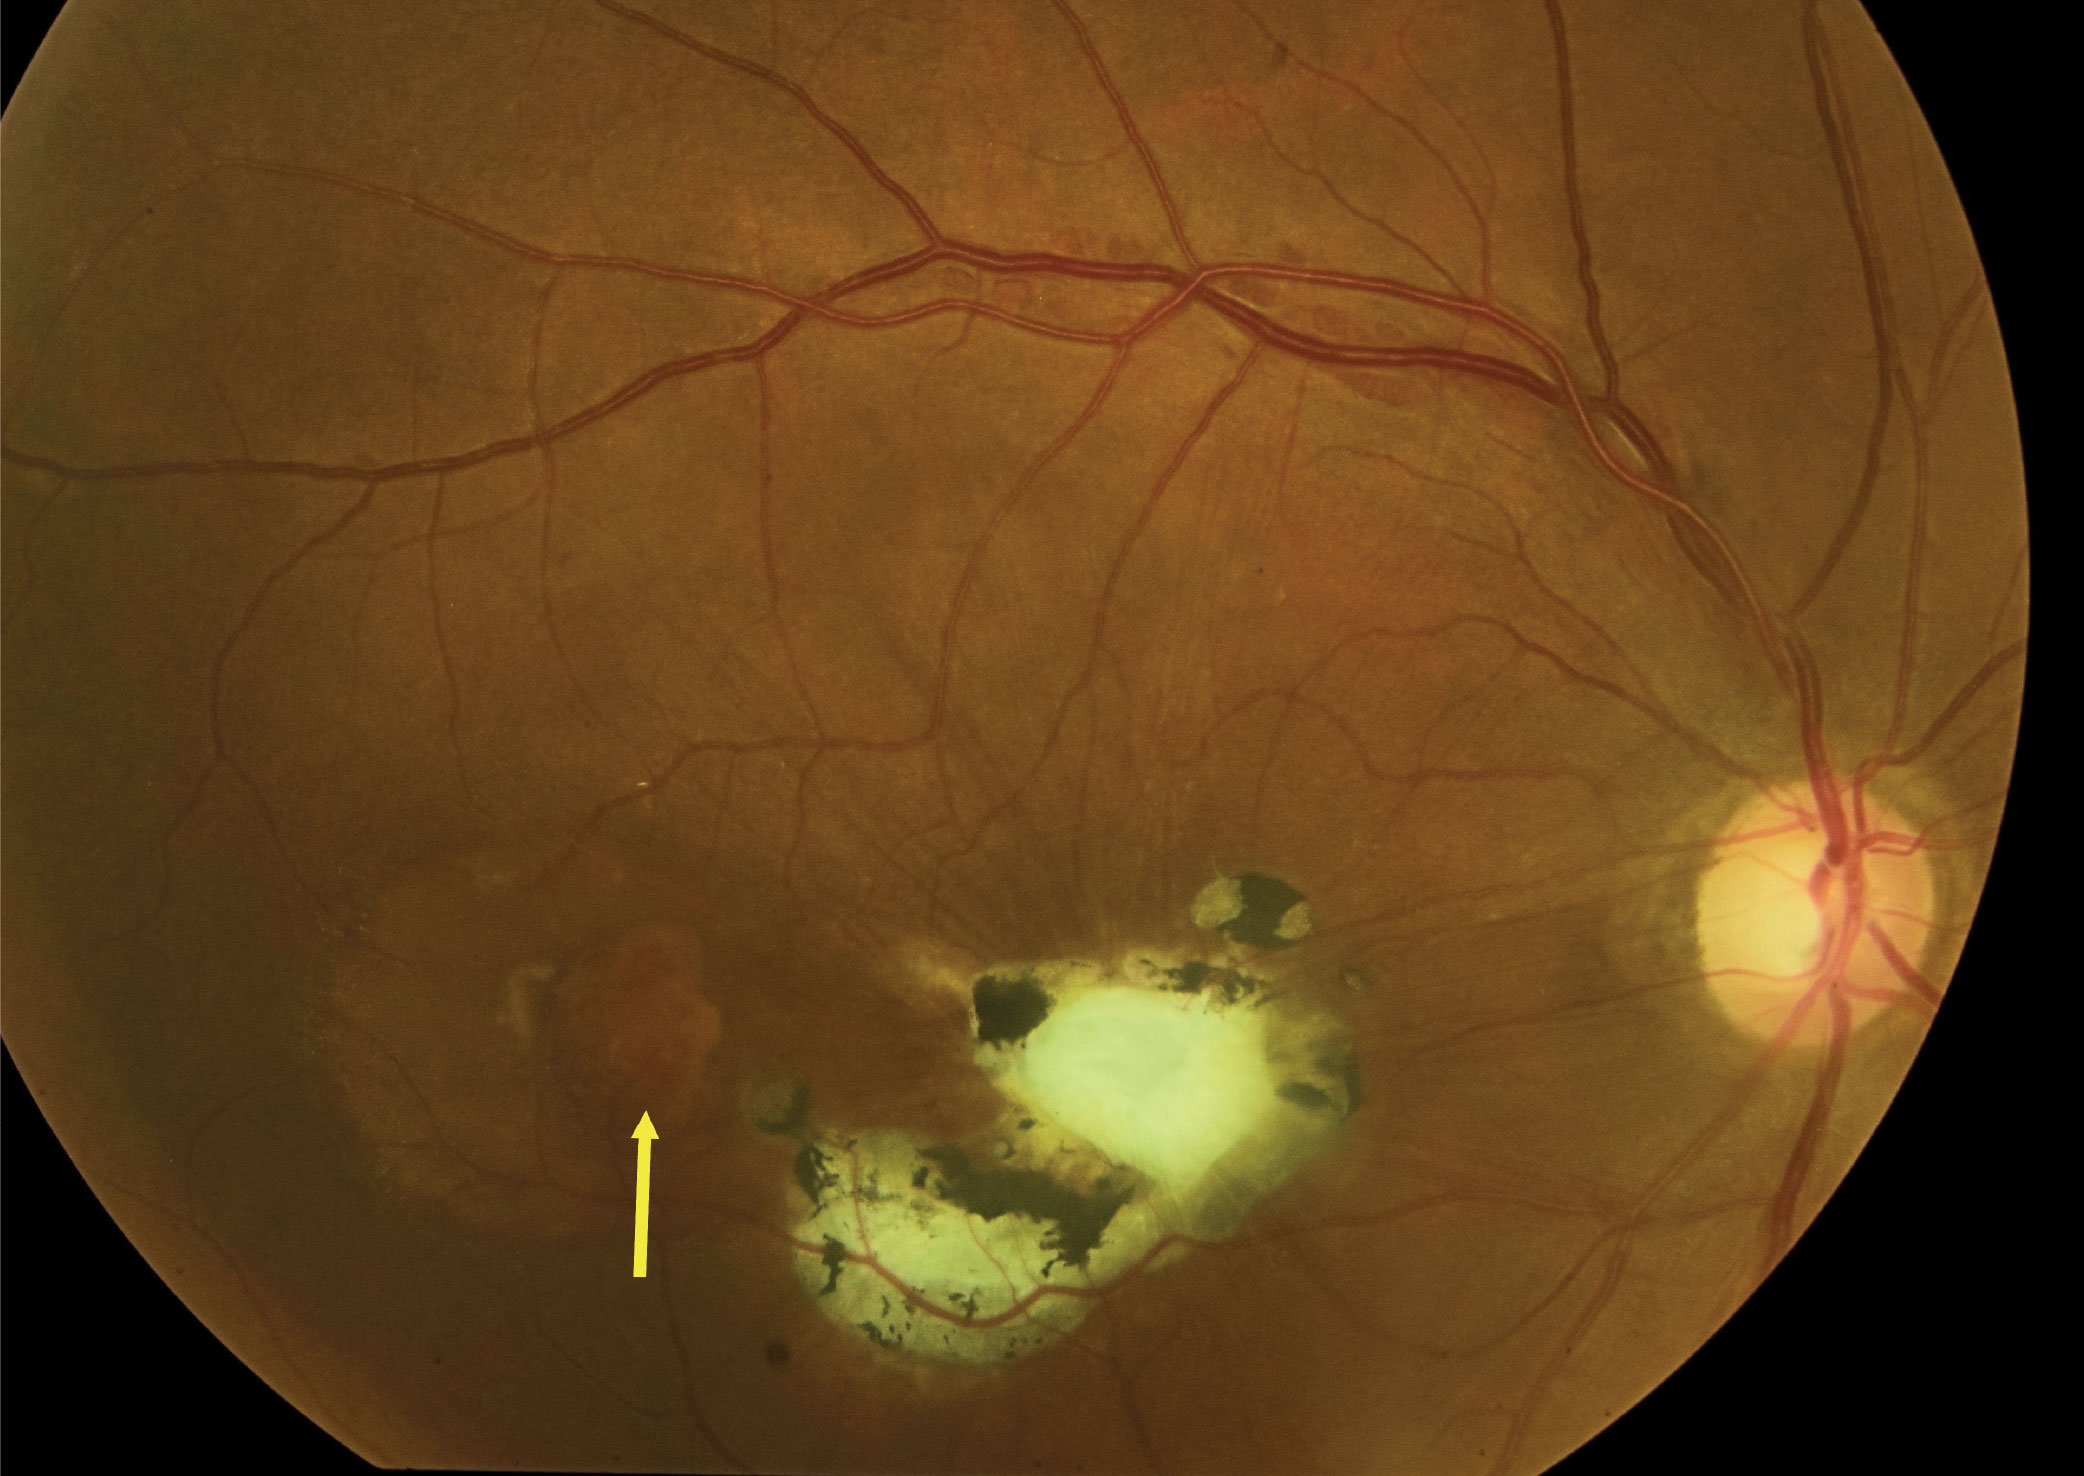 Fundus photo of the right eye. What might that central fibrotic lesion represent?